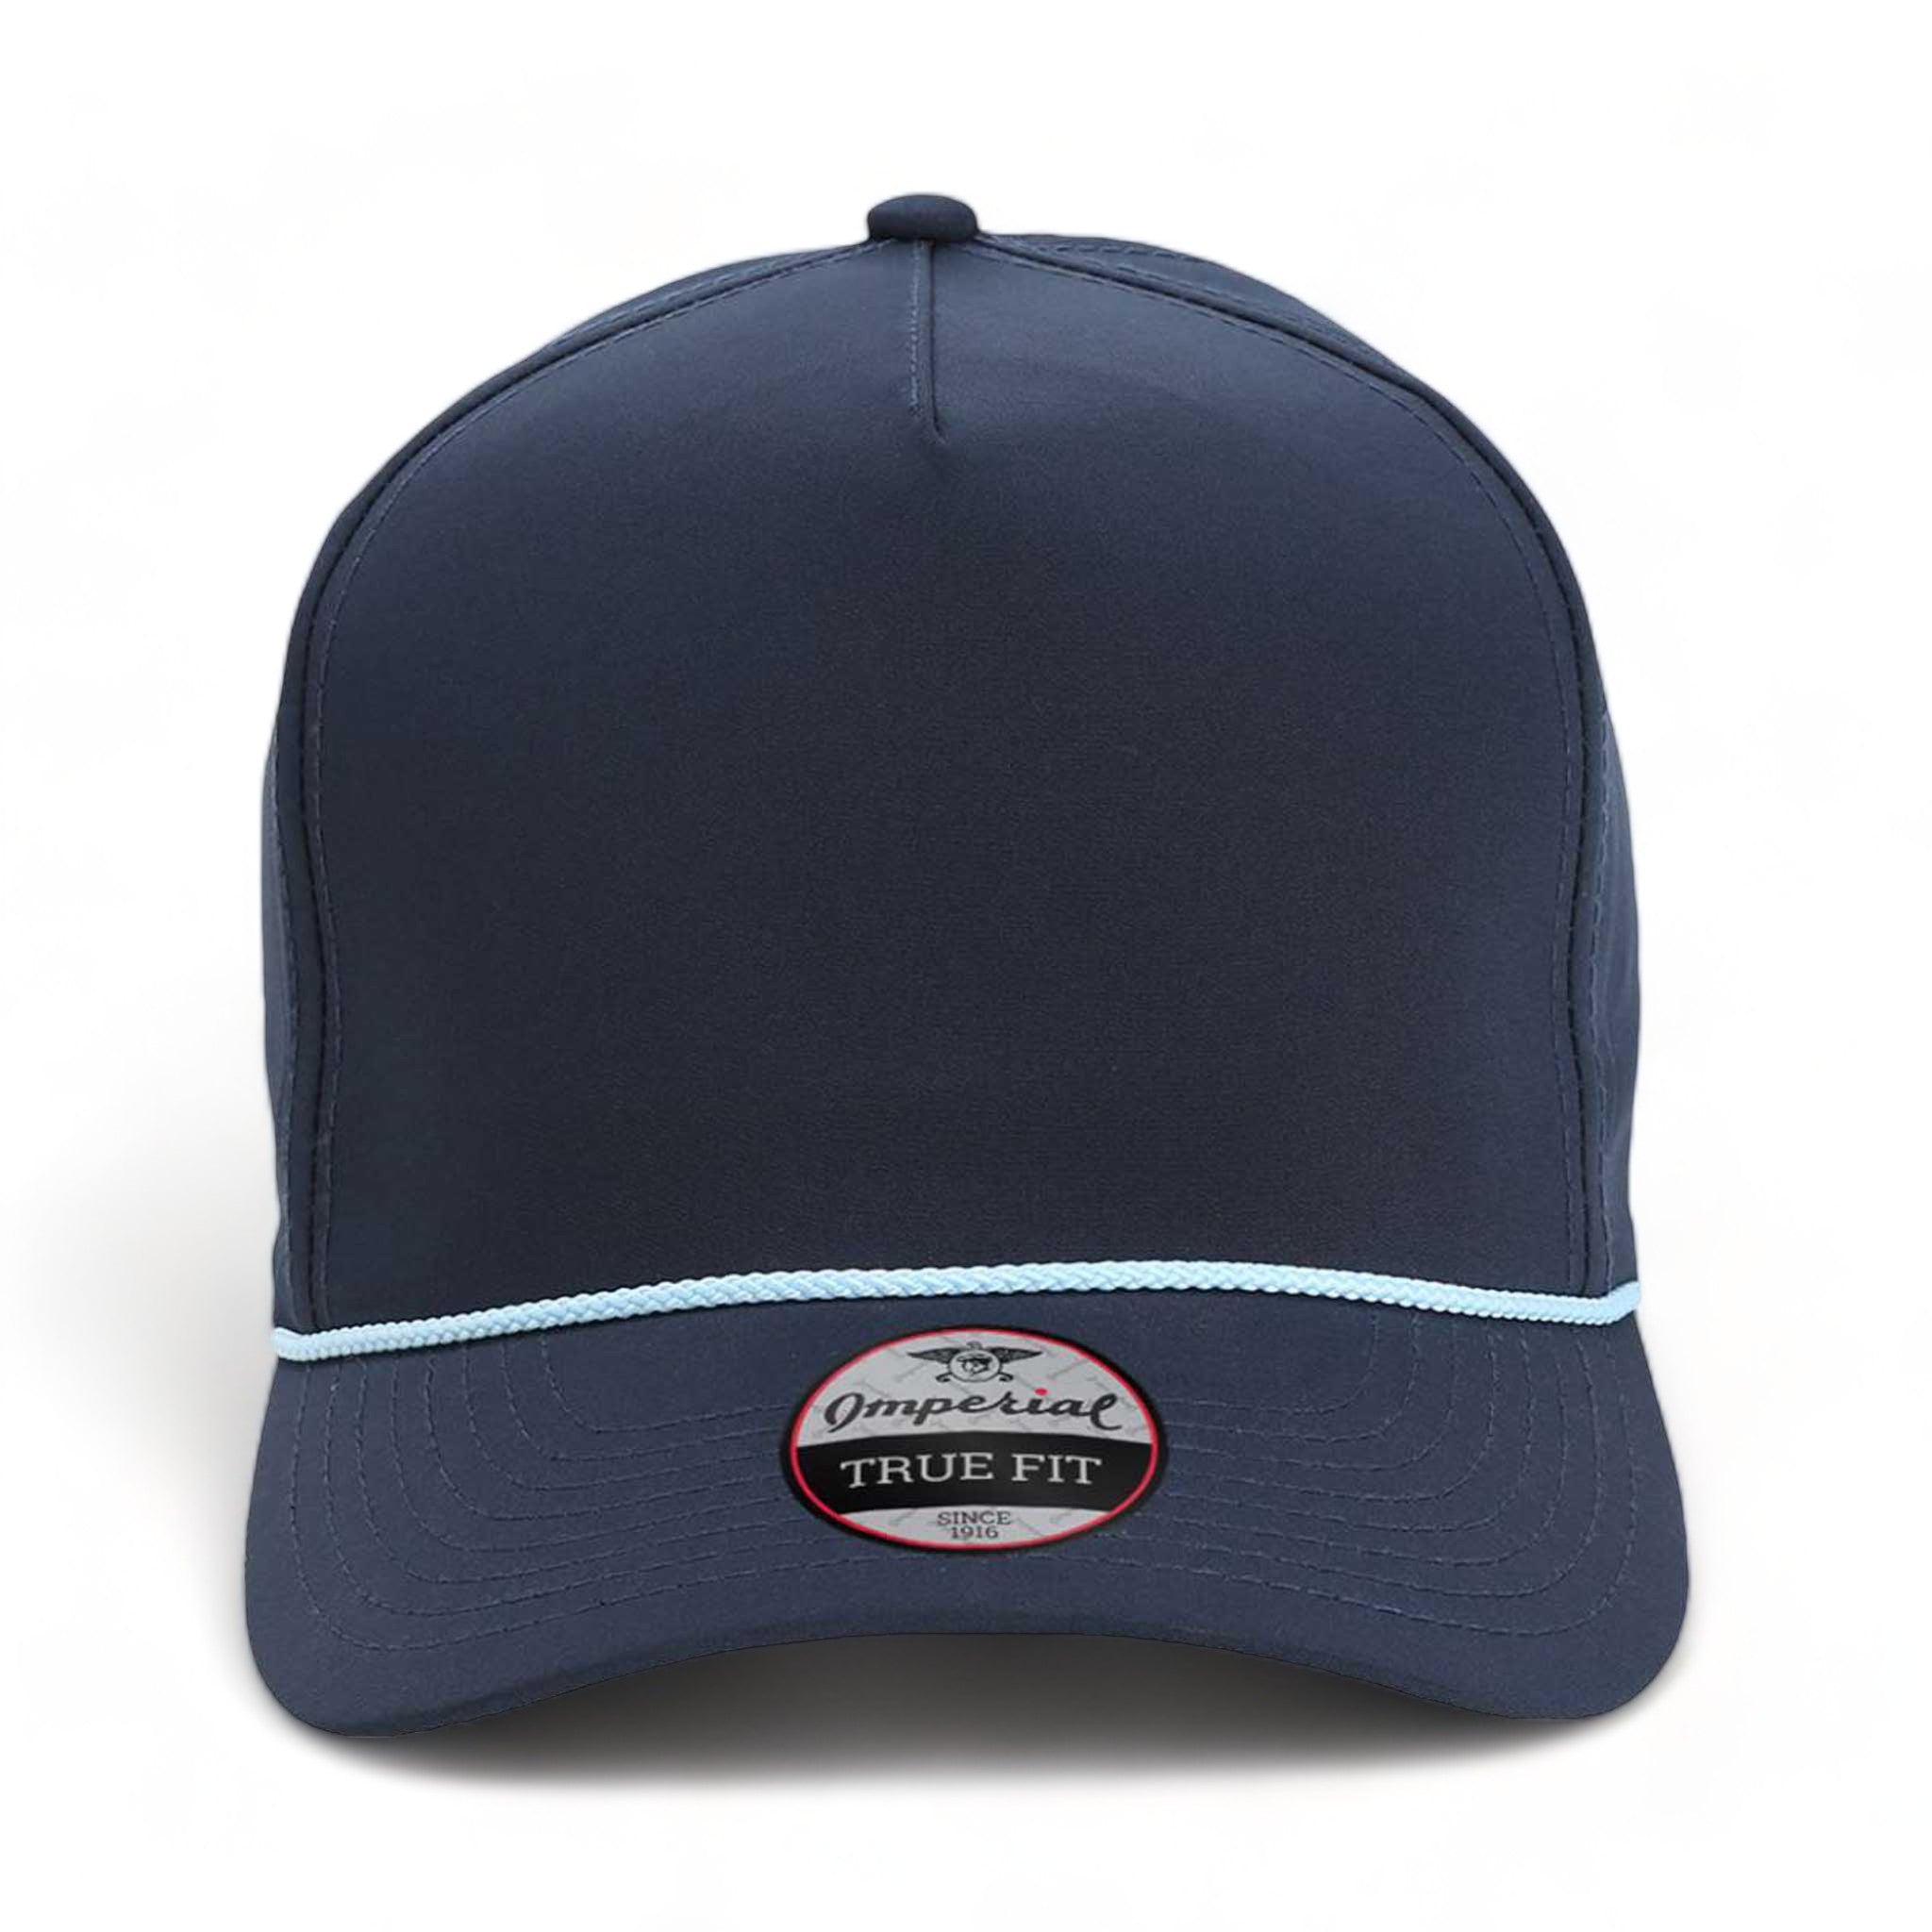 Front view of Imperial 5054 custom hat in navy and light blue